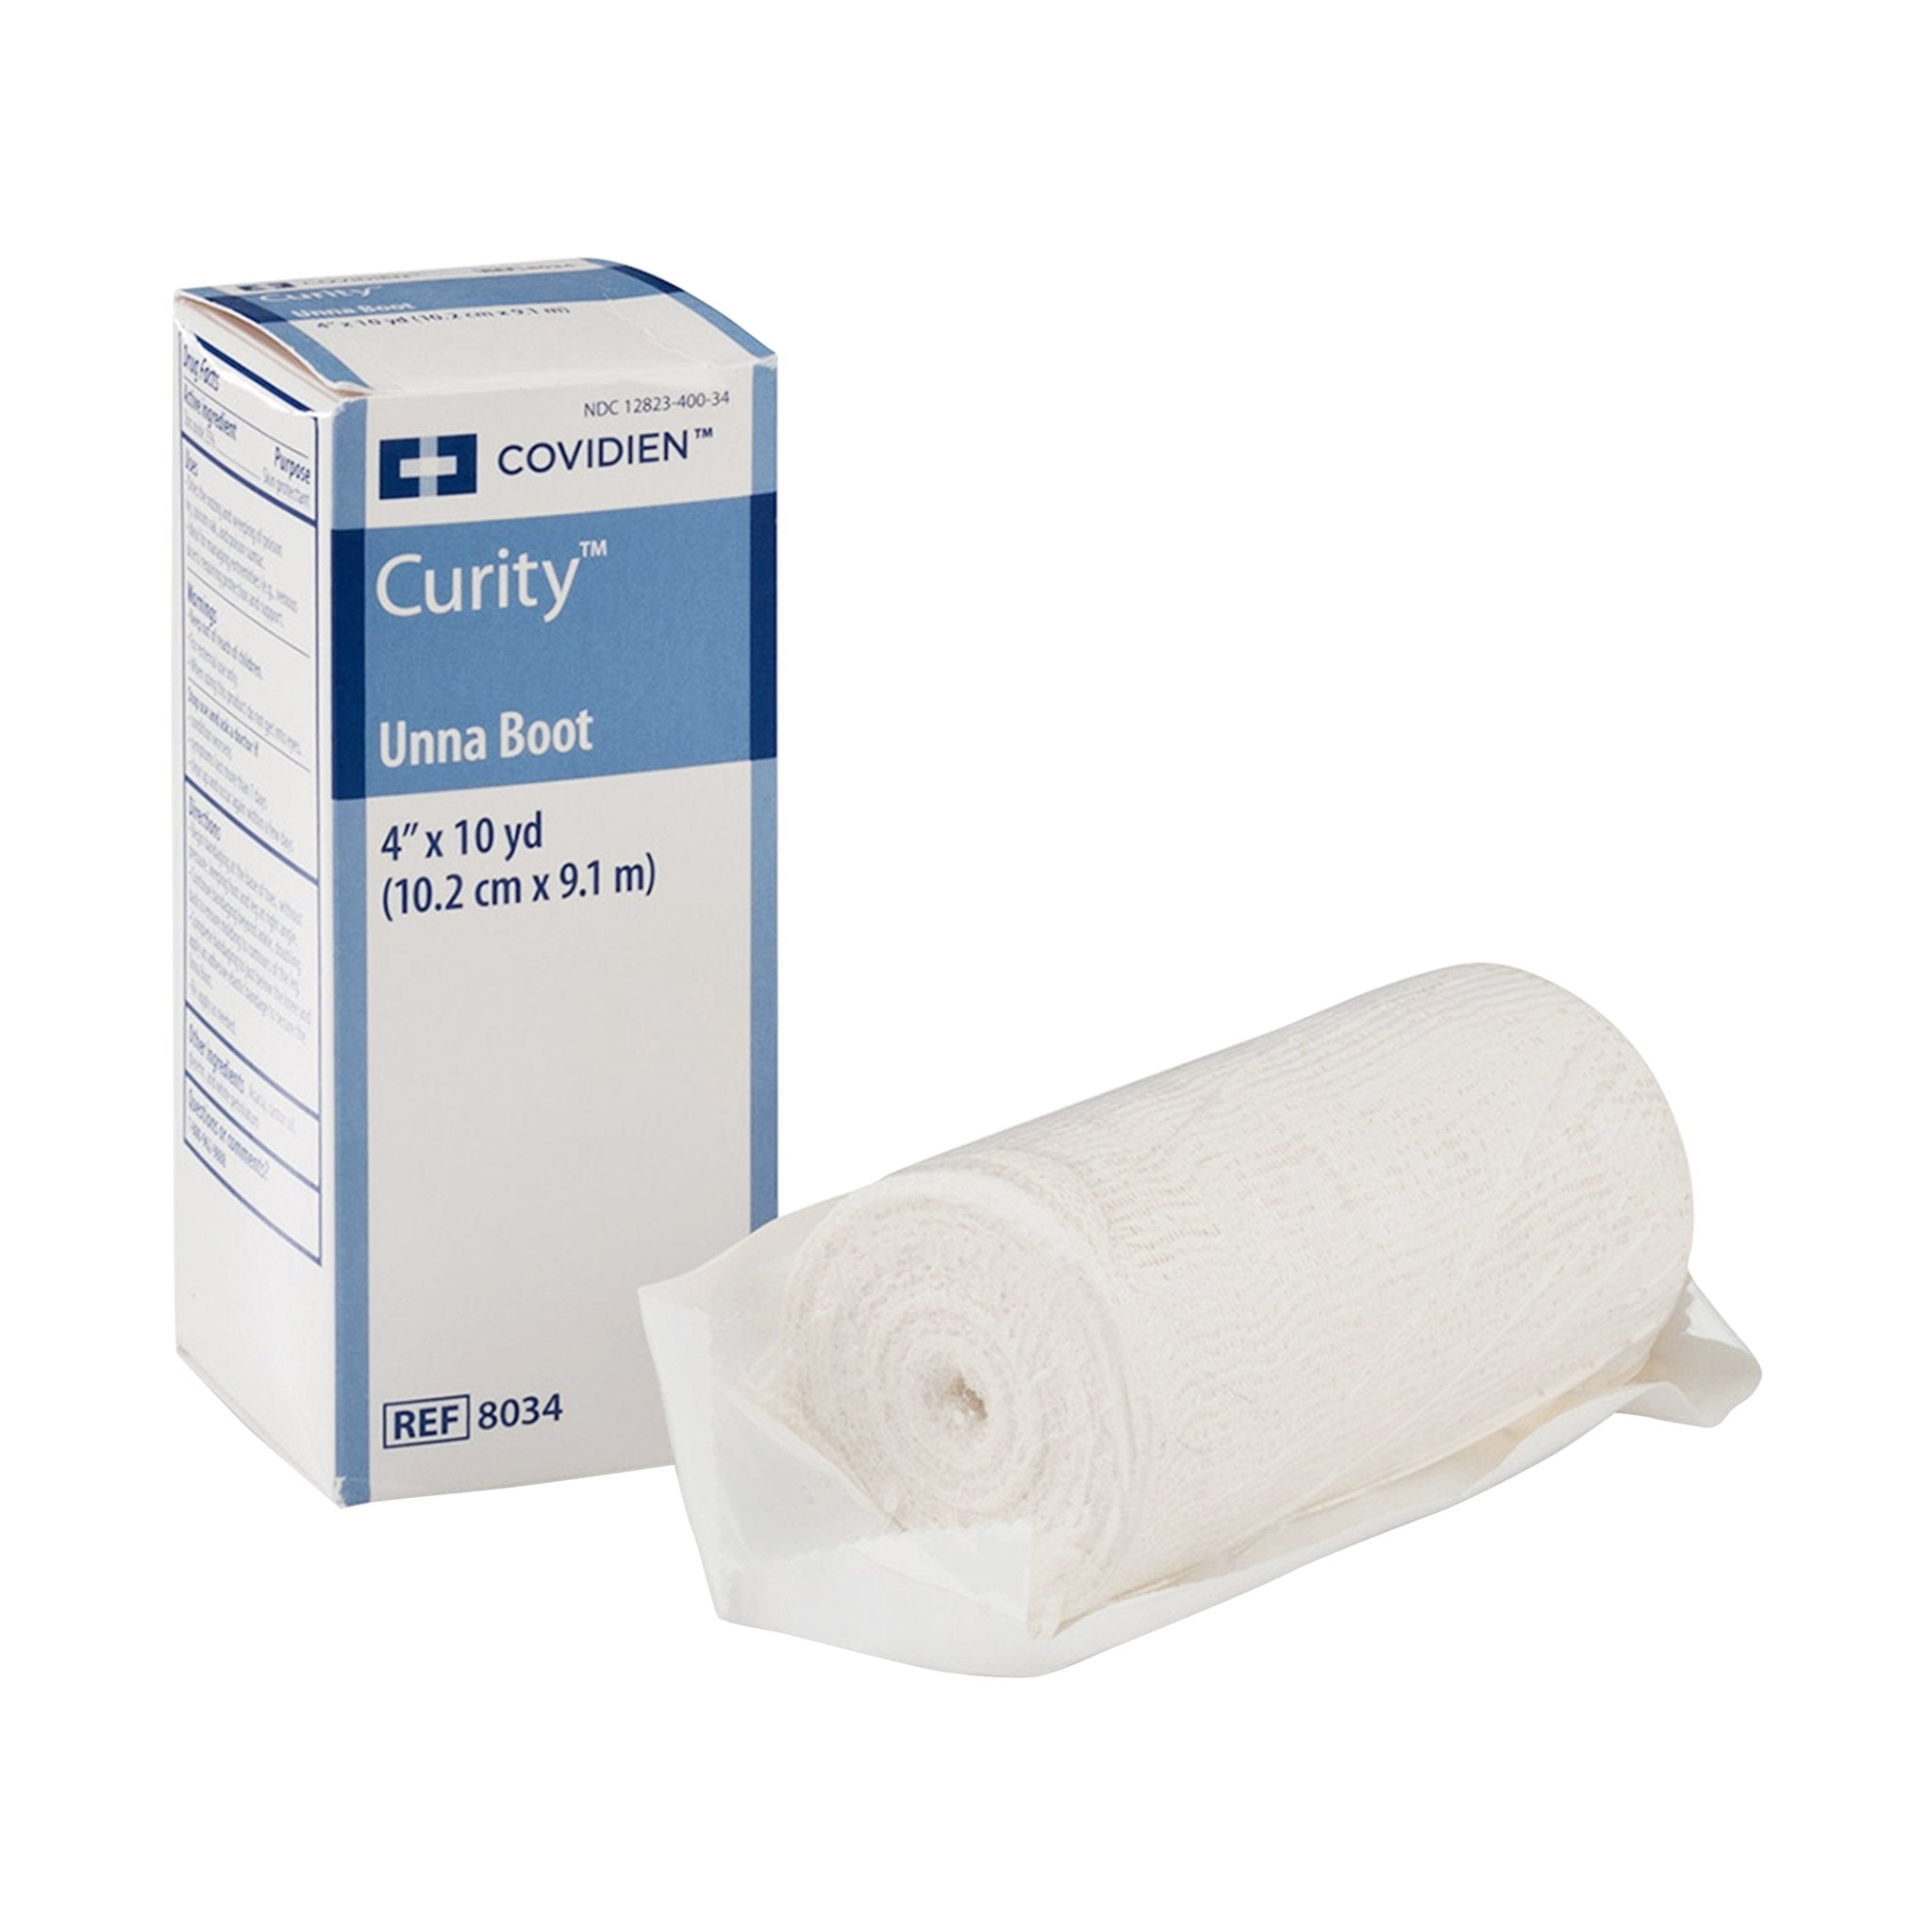 EA/1 - Curity Unna Boot Bandage with Calamine, 4" x 10 yds. - Best Buy Medical Supplies